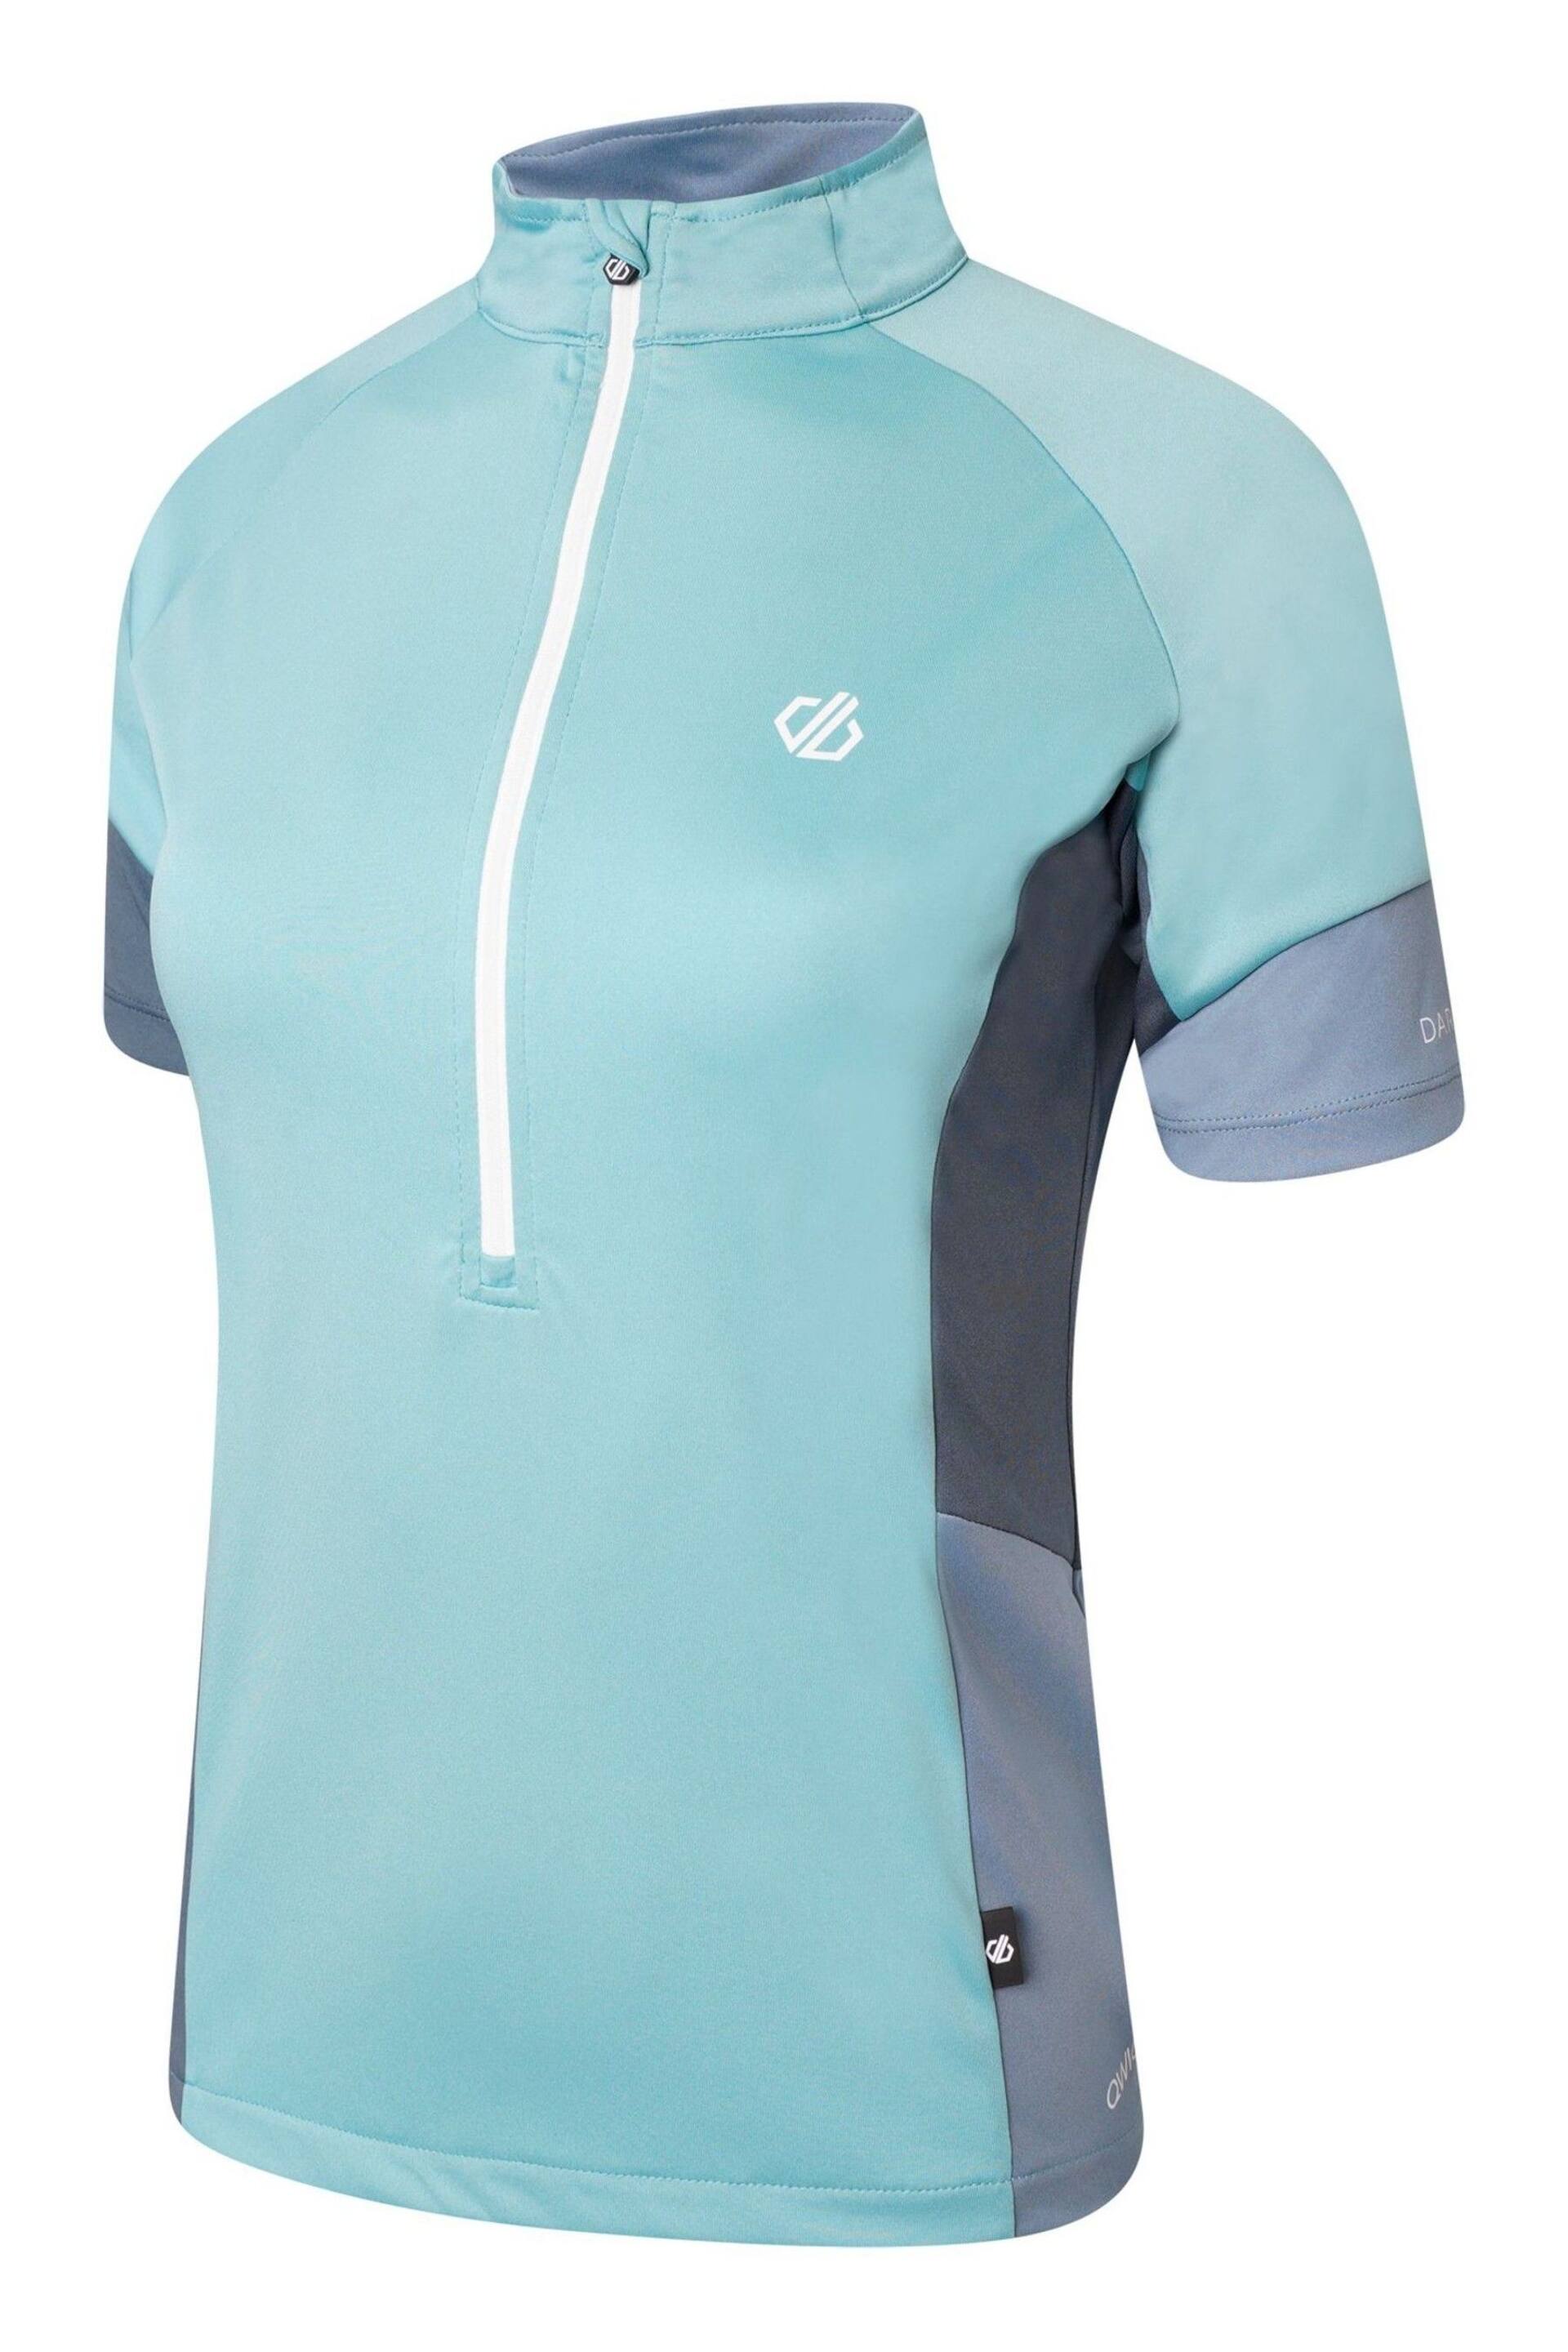 Dare 2b Compassion II Cycle Jersey - Image 3 of 3